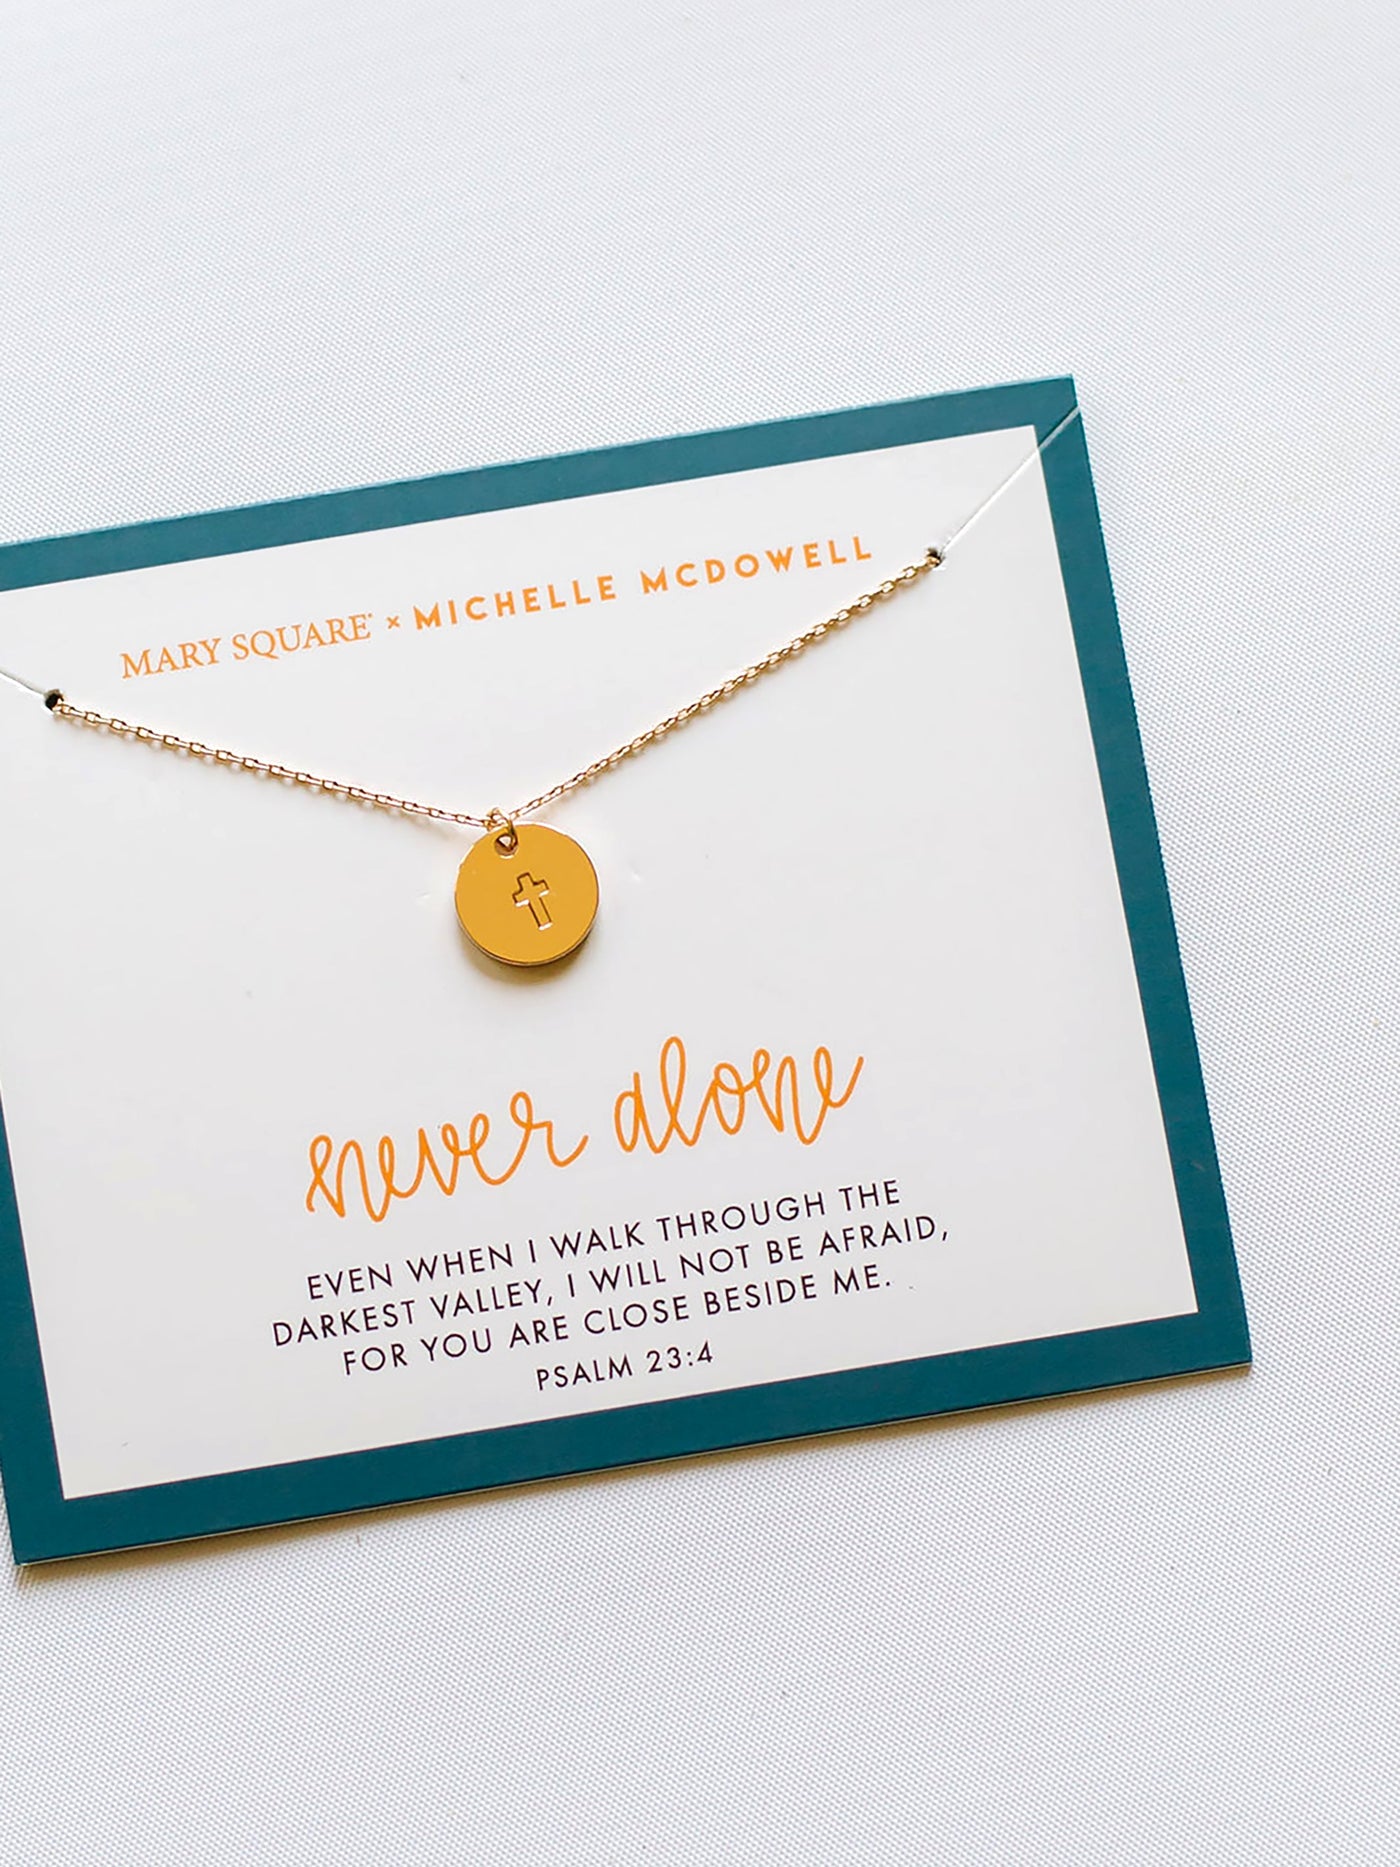 Never Alone Inspirational Necklace - Mary Square, LLC